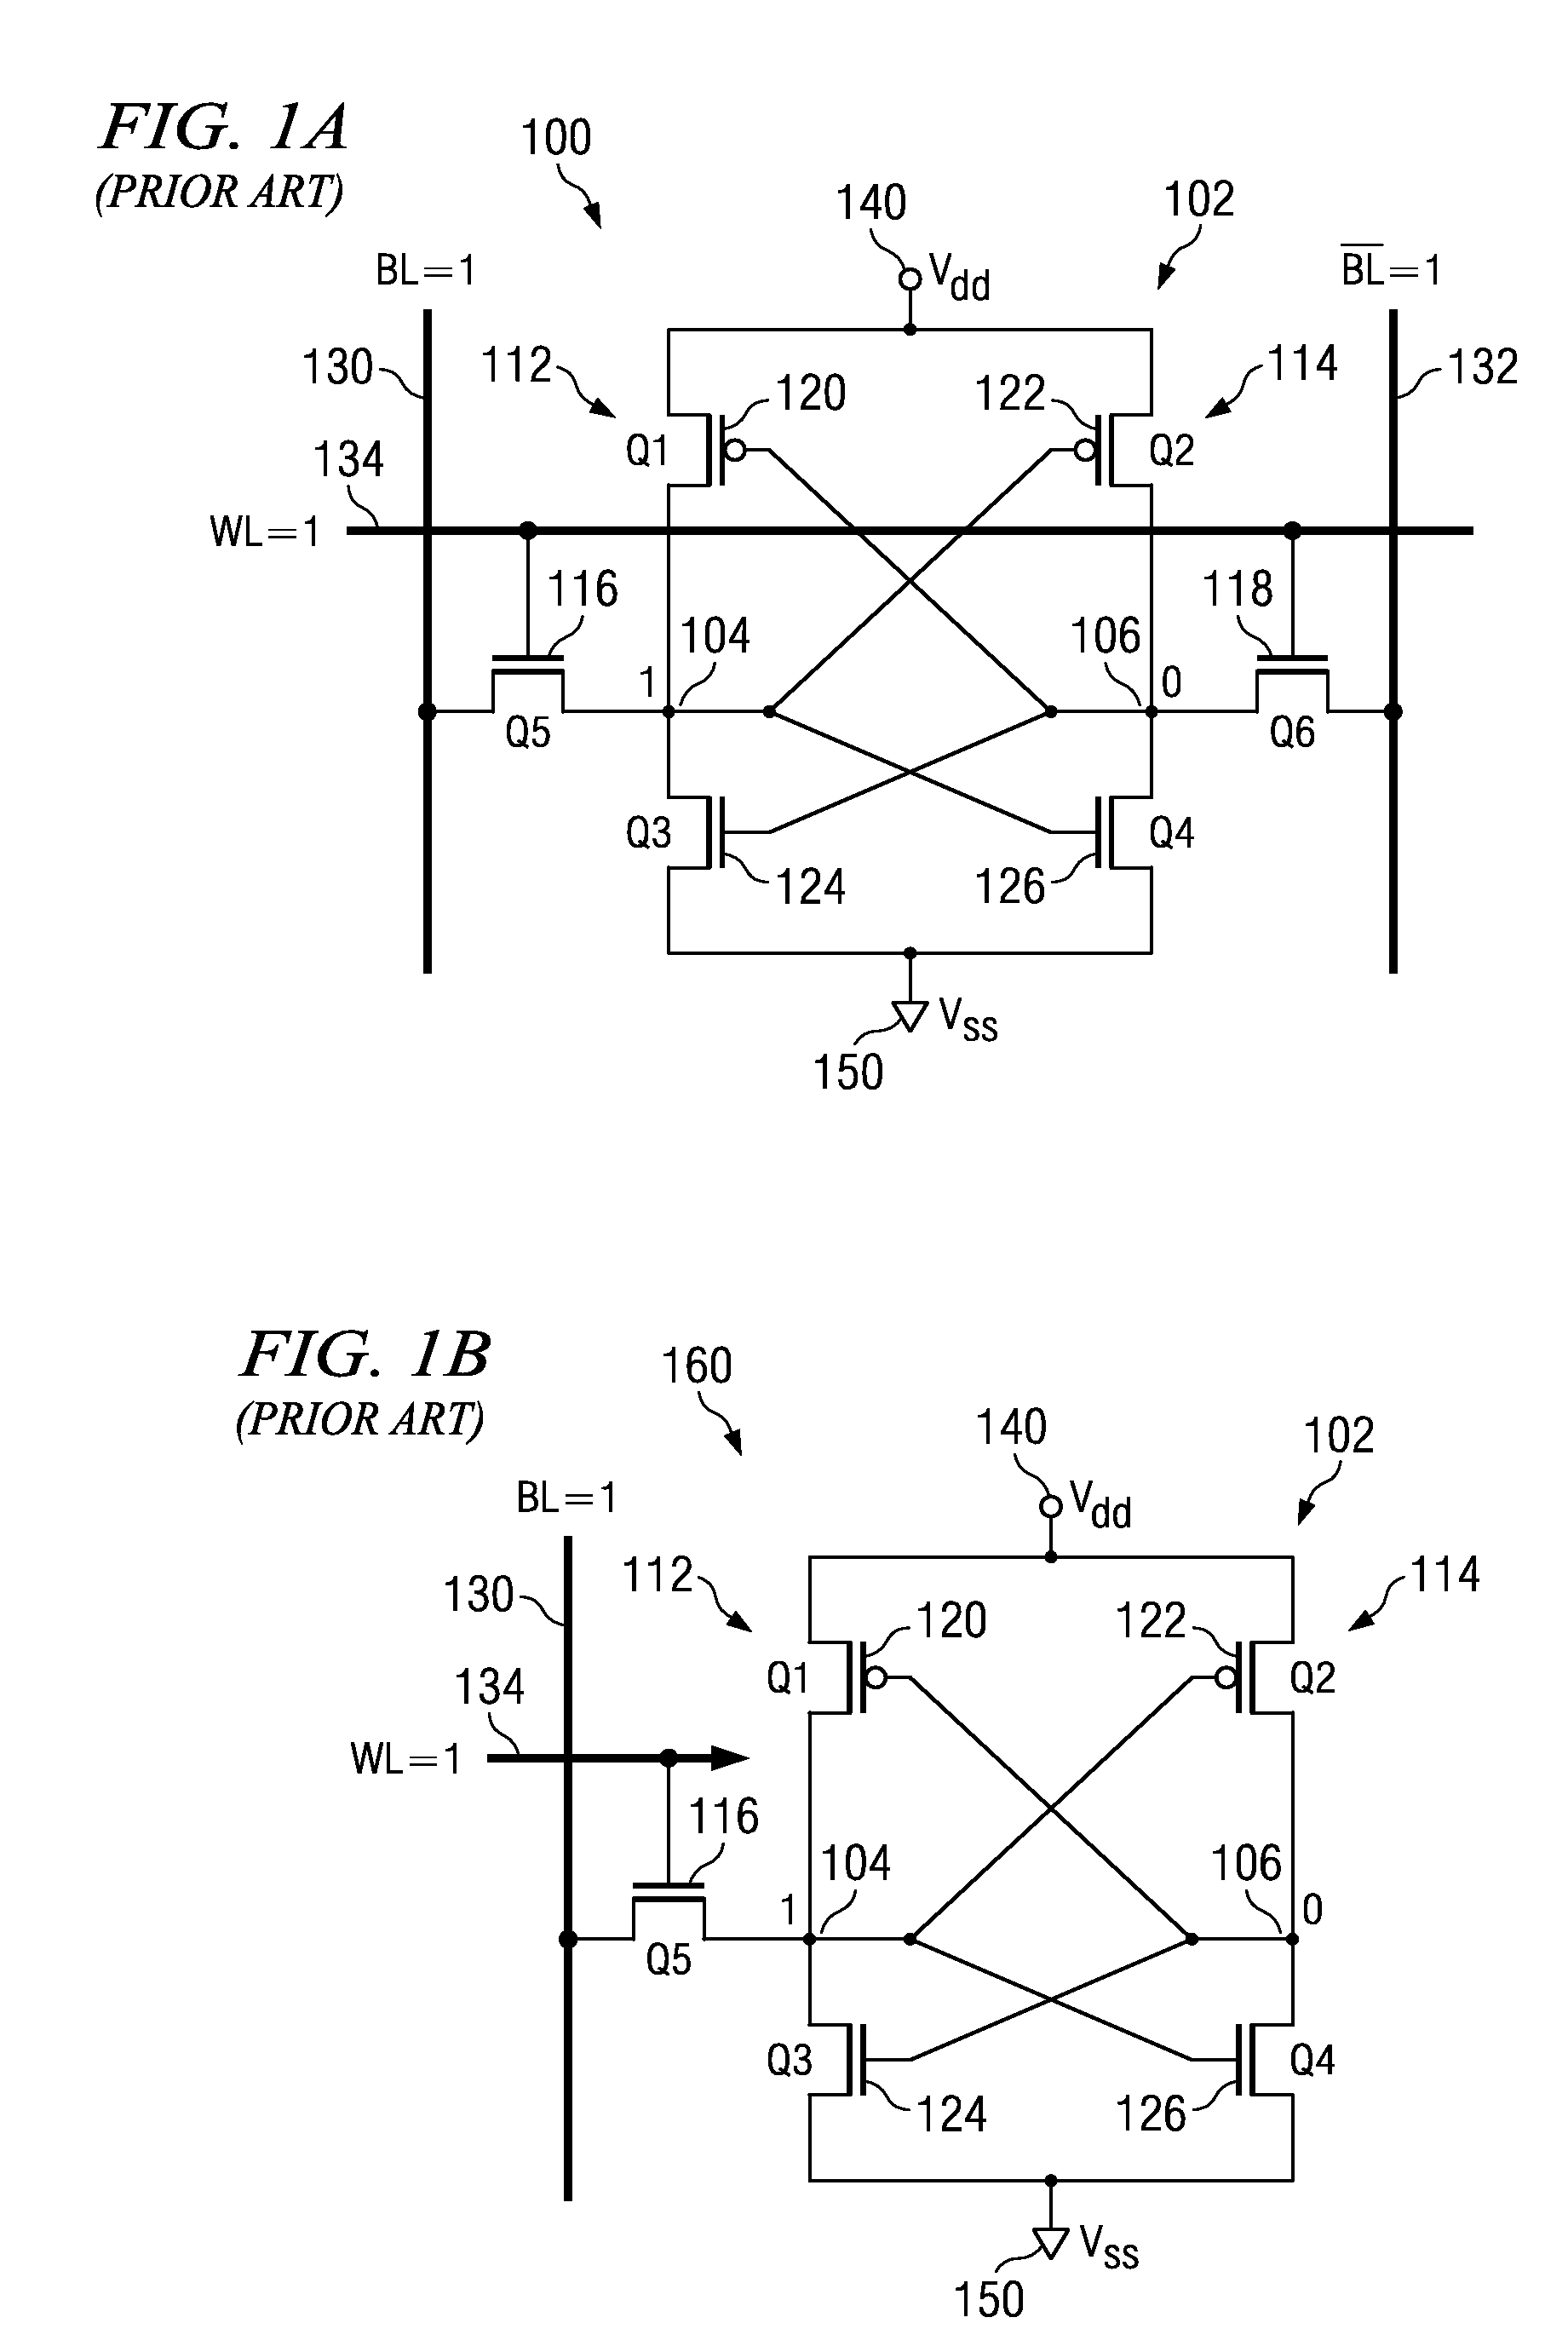 SRAM cell with column select line